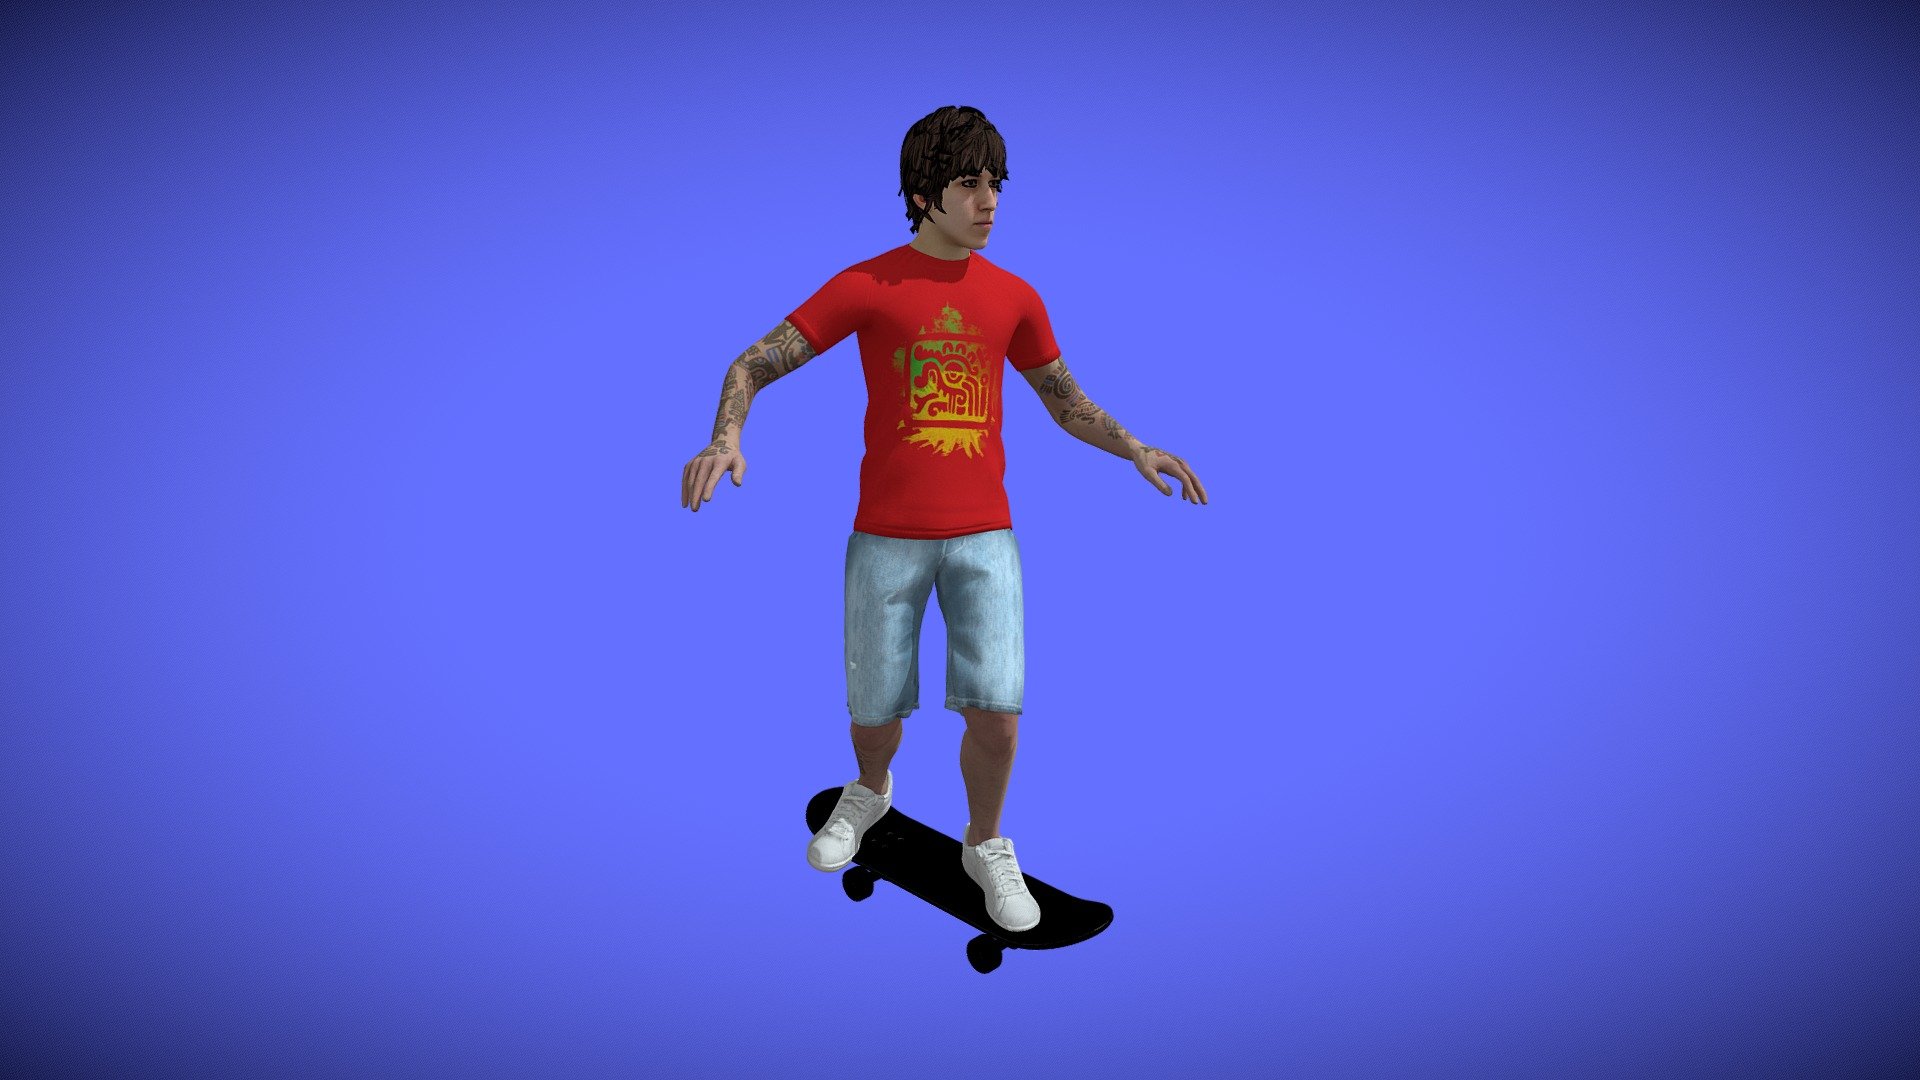 A short looped animation shows a tatooed skater boy riding a black skateboard at 30 frames per second.

See this 3D model in action, and more models like it, in this collection of free augmented reality apps:

https://morpheusar.com/ - Animated Tattooed Skateboarder Character Rides - 3D model by LasquetiSpice 3d model